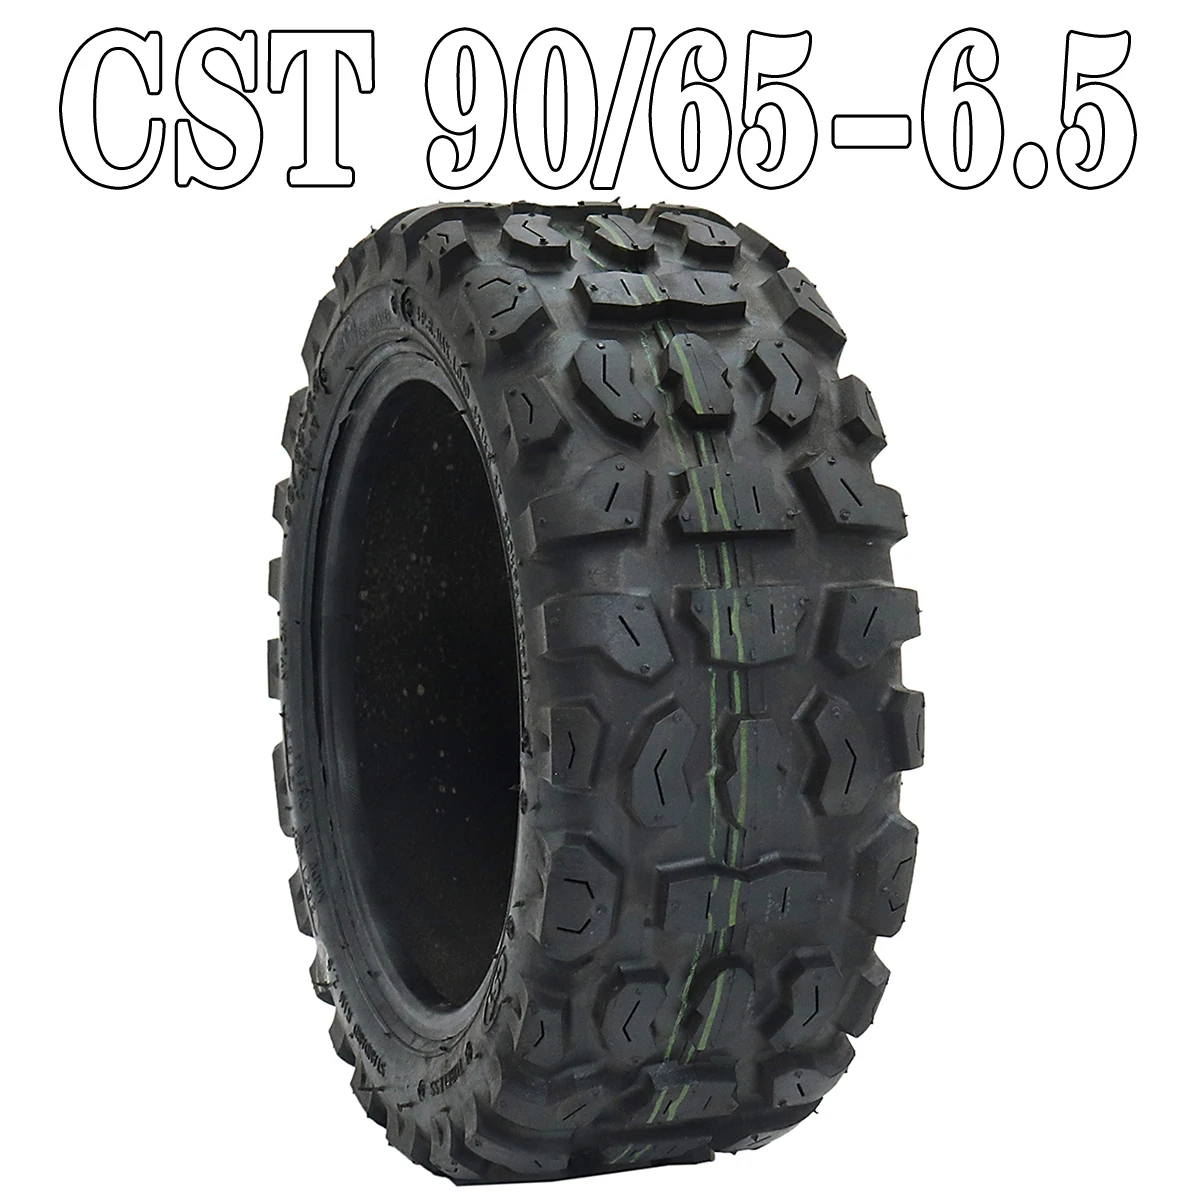 

CST 90/65-6.5 11 Inch Pneumatic Tyre Tubeless Tire With Inner Tube for Dualtron Ultra Speedual Plus Zero 11x Electric Scooters